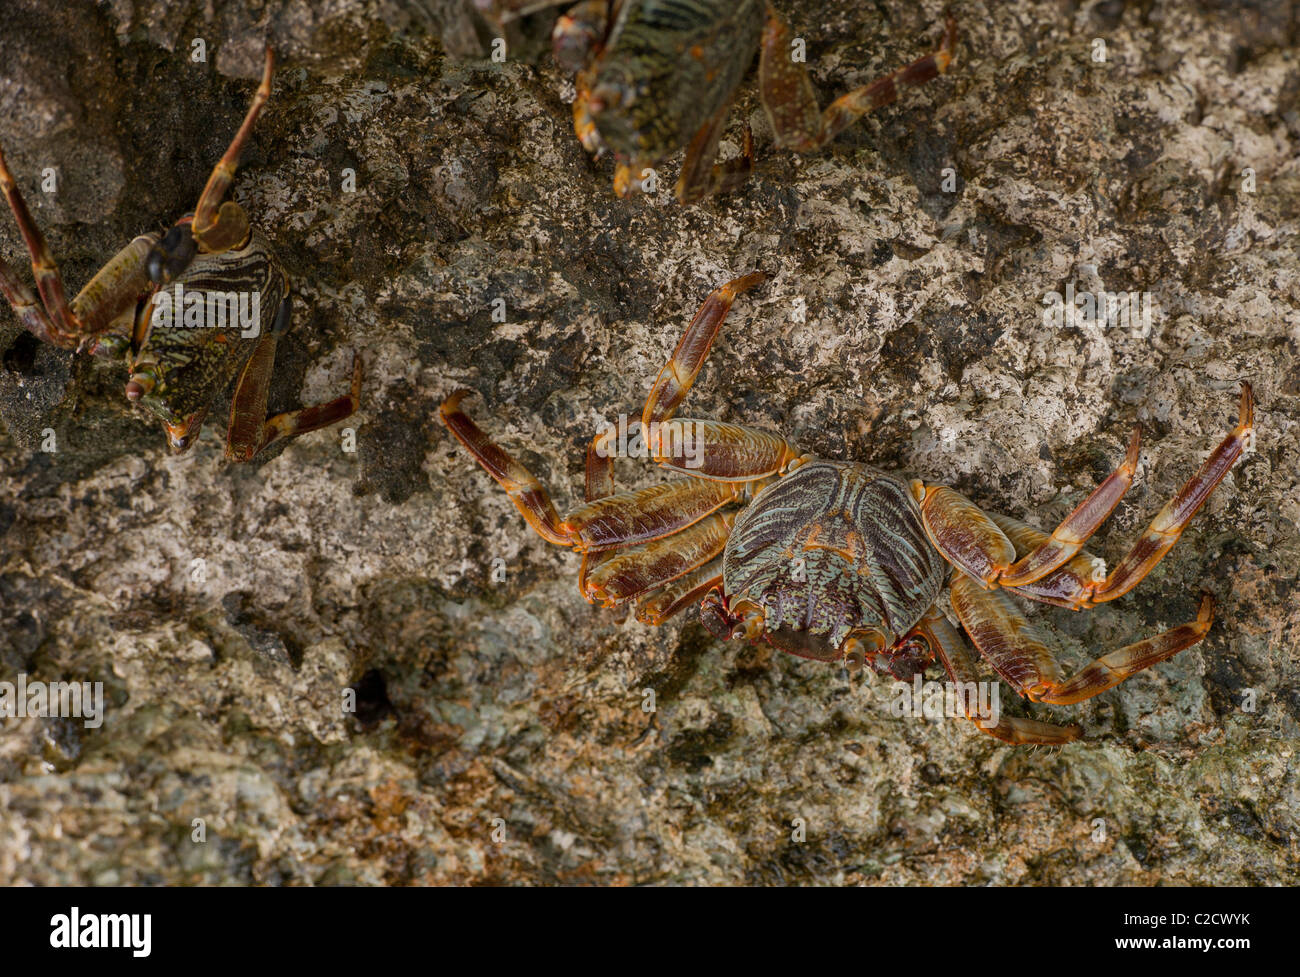 Three Red Sea swimming crabs clinging to a rock out of the water Stock Photo